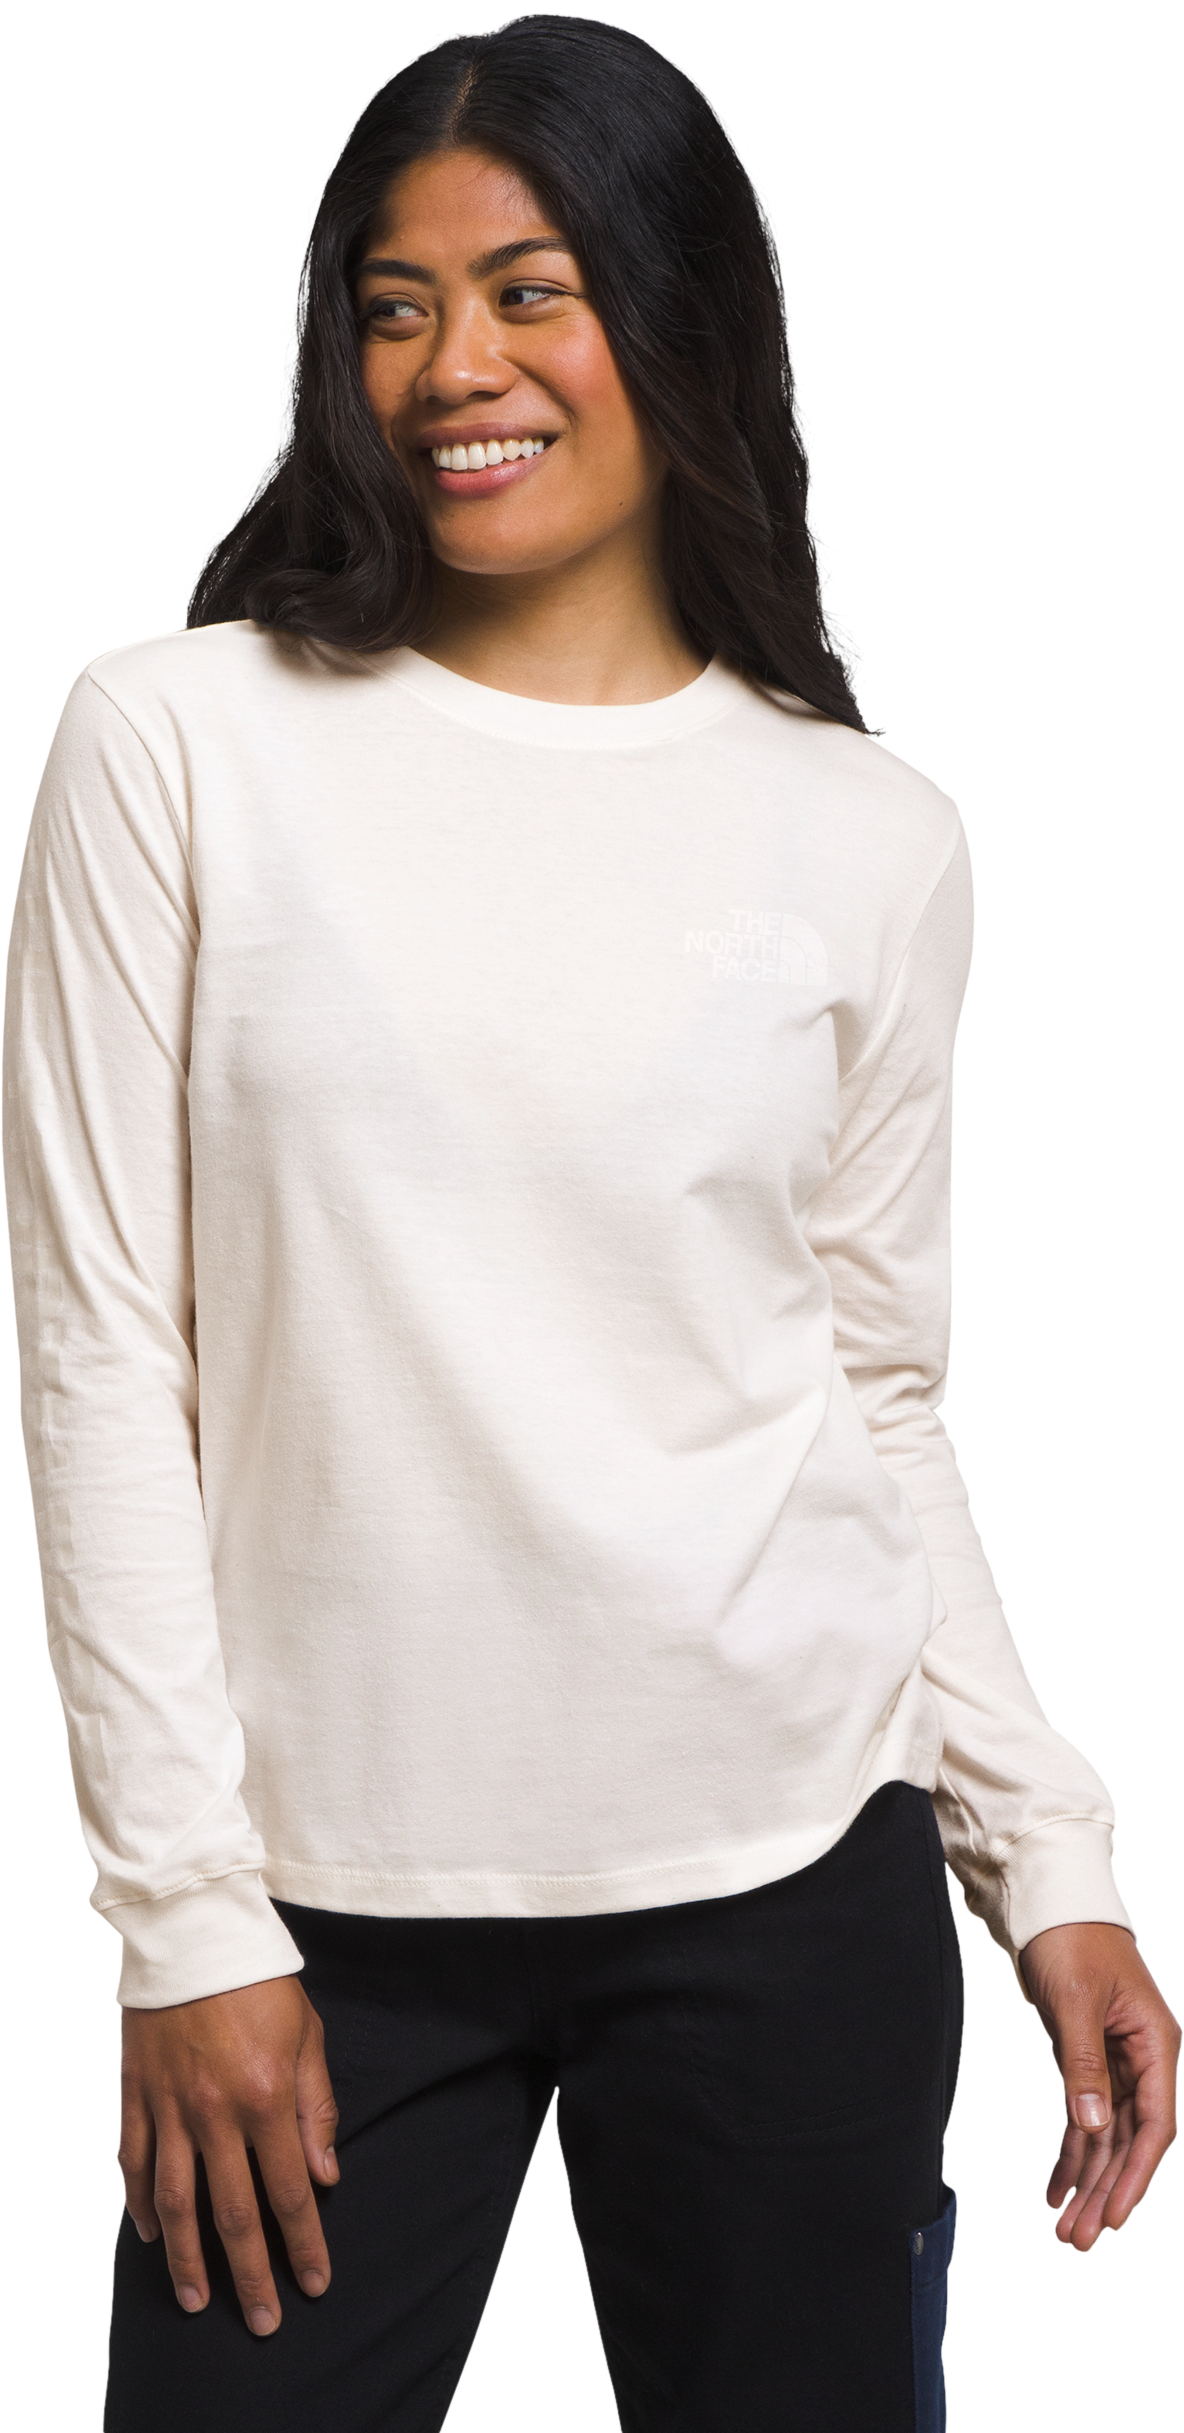 The North Face Hit Graphic Long-Sleeve T-Shirt for Ladies - Gardenia White/Tonal - M